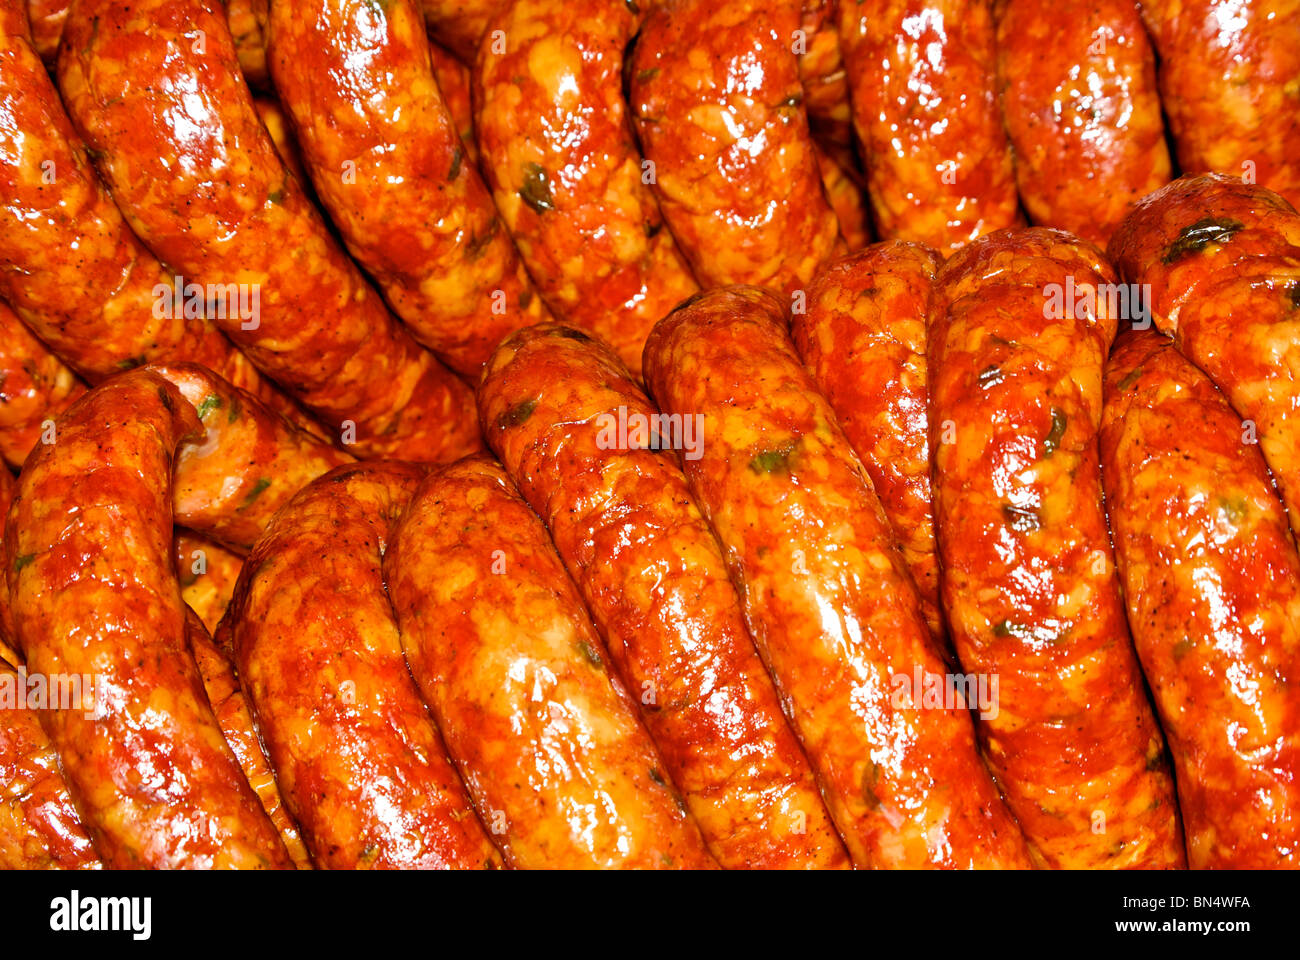 Cooked smoked boudin sausages glistening with oil at The Sausage Link factory Sulphur LA Stock Photo